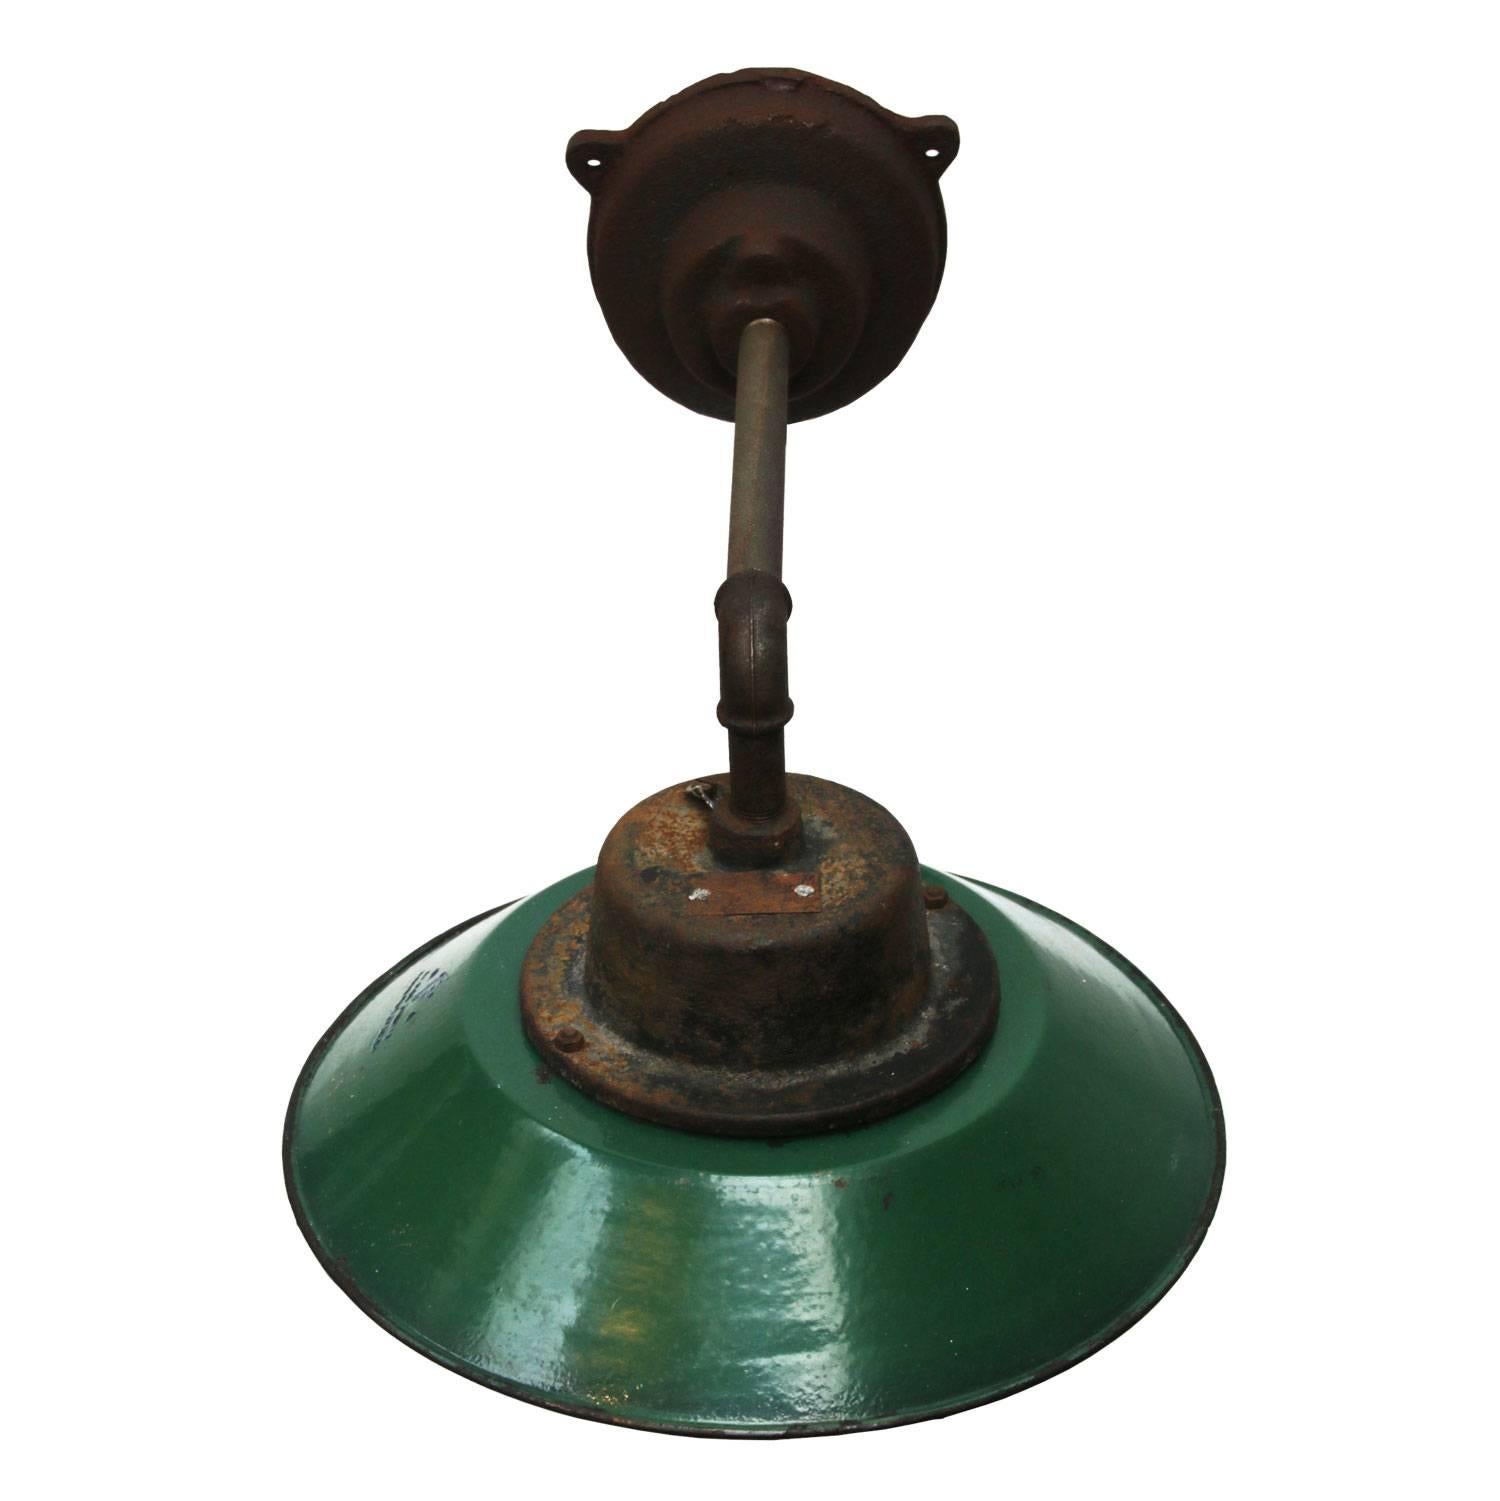 Green colored enamel Industrial wall light with white interior. Clear glass.
Diameter cast iron wall mount: 12 cm, three holes to secure,

weight: 5.5 kg / 12.1 lb

For use outdoors as well as indoors. 

All lamps have been made suitable by